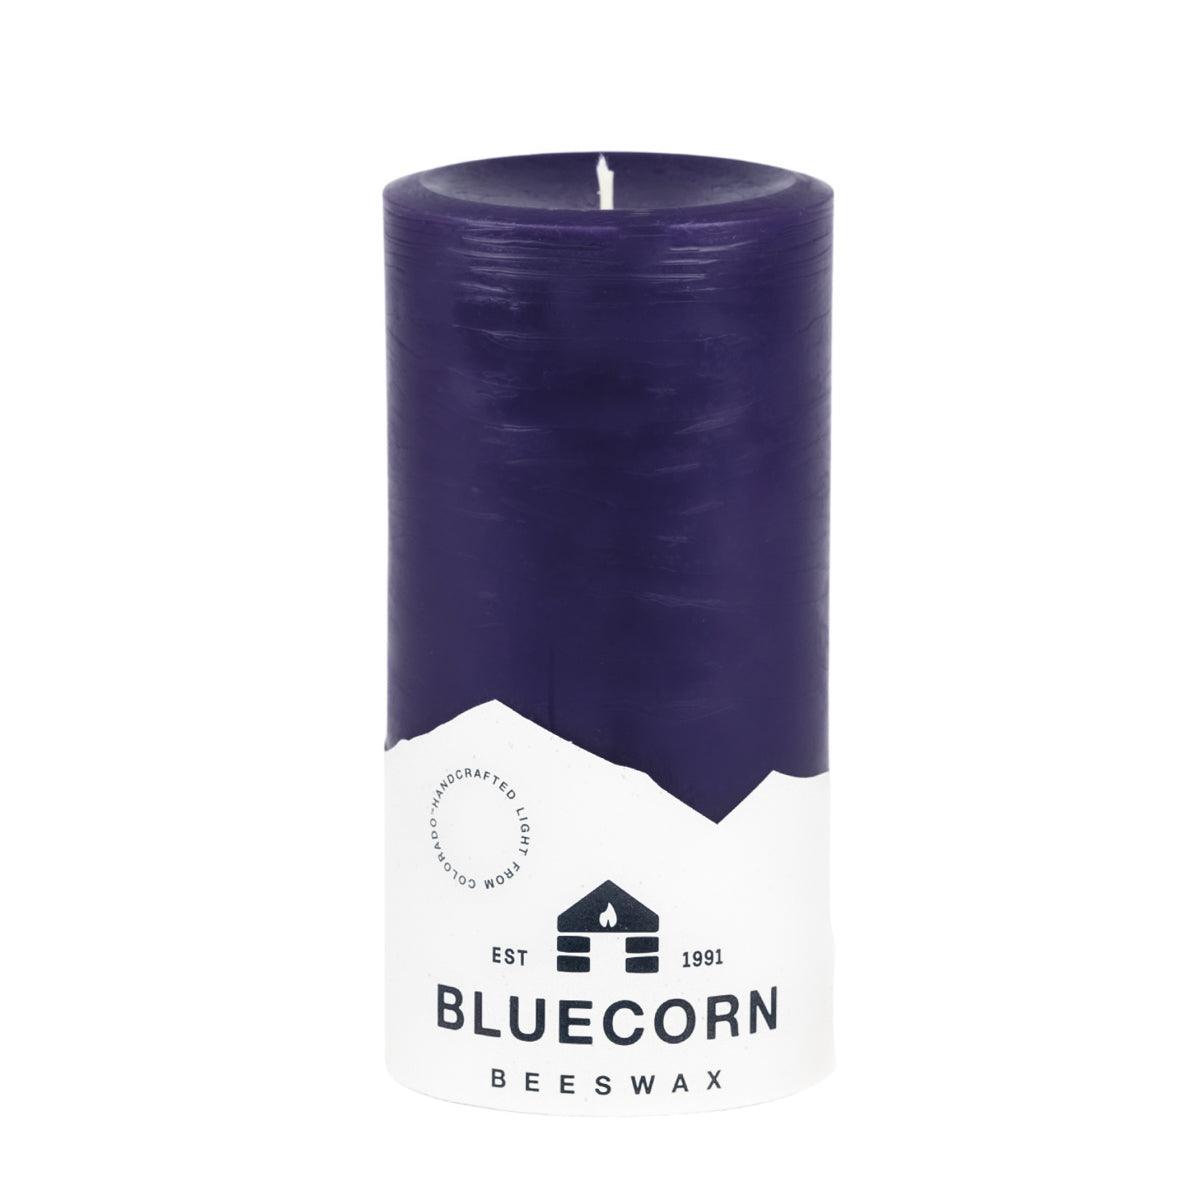 Bluecorn Beeswax 100% Pure Beeswax 3" x 6" Colored Pillar Candle is Eggplant in color. Burn Time: 90 hours. Made with 100% Pure Beeswax, is . Made with 100% pure cotton wick, no lead and paraffin free. Clean burning and non-toxic. Features Bluecorn Beeswax label printed on 100% recycled paper.